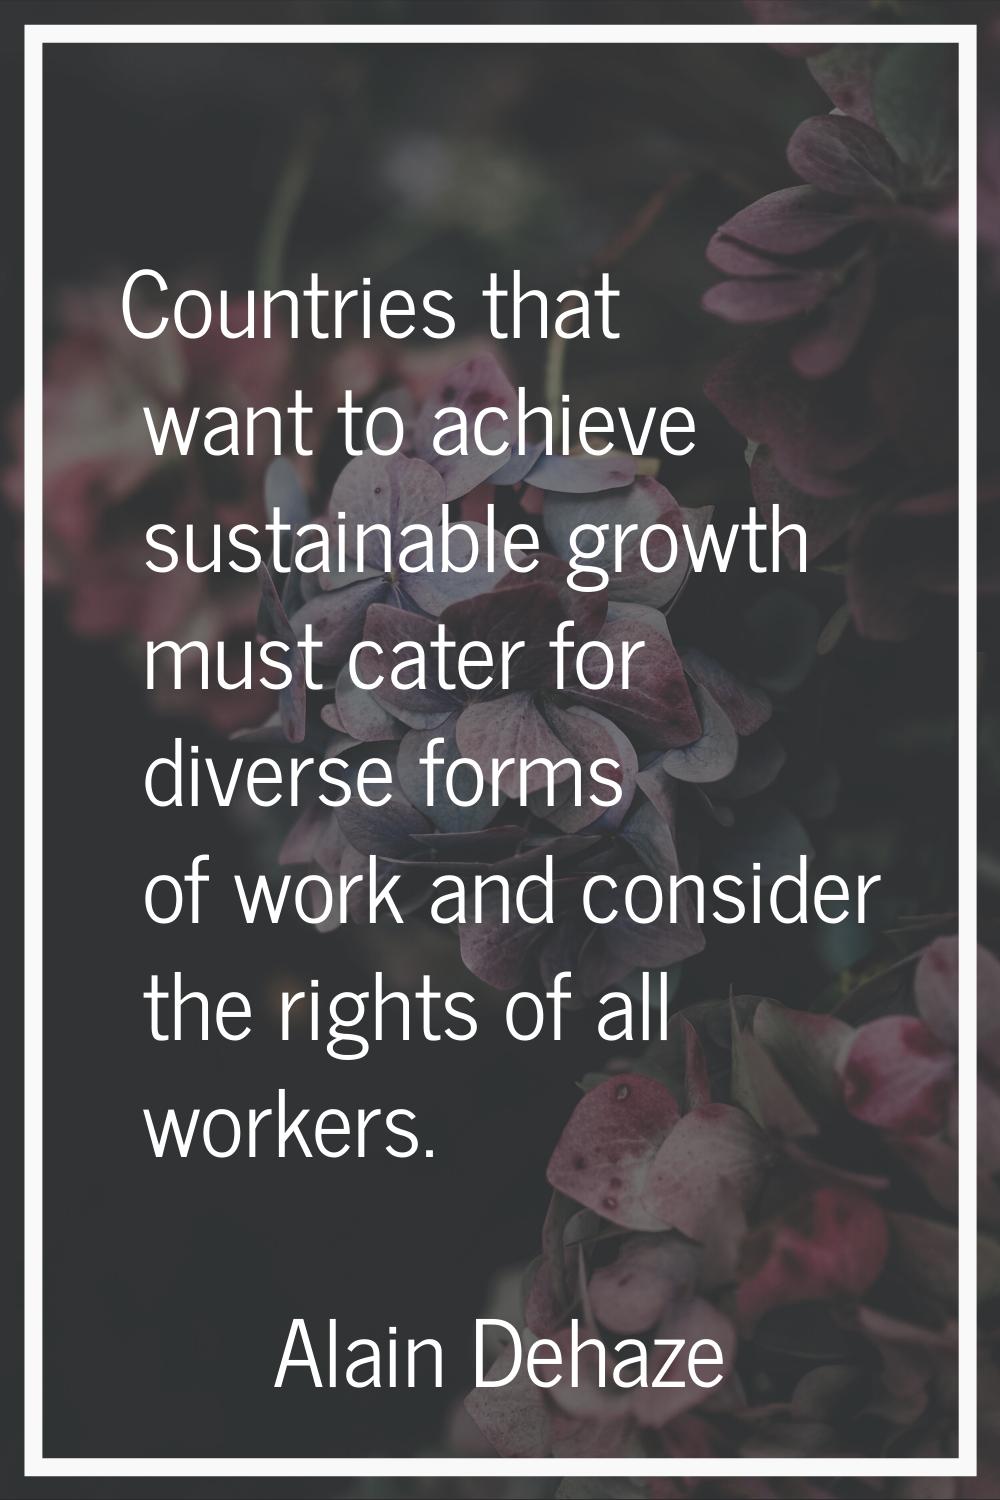 Countries that want to achieve sustainable growth must cater for diverse forms of work and consider